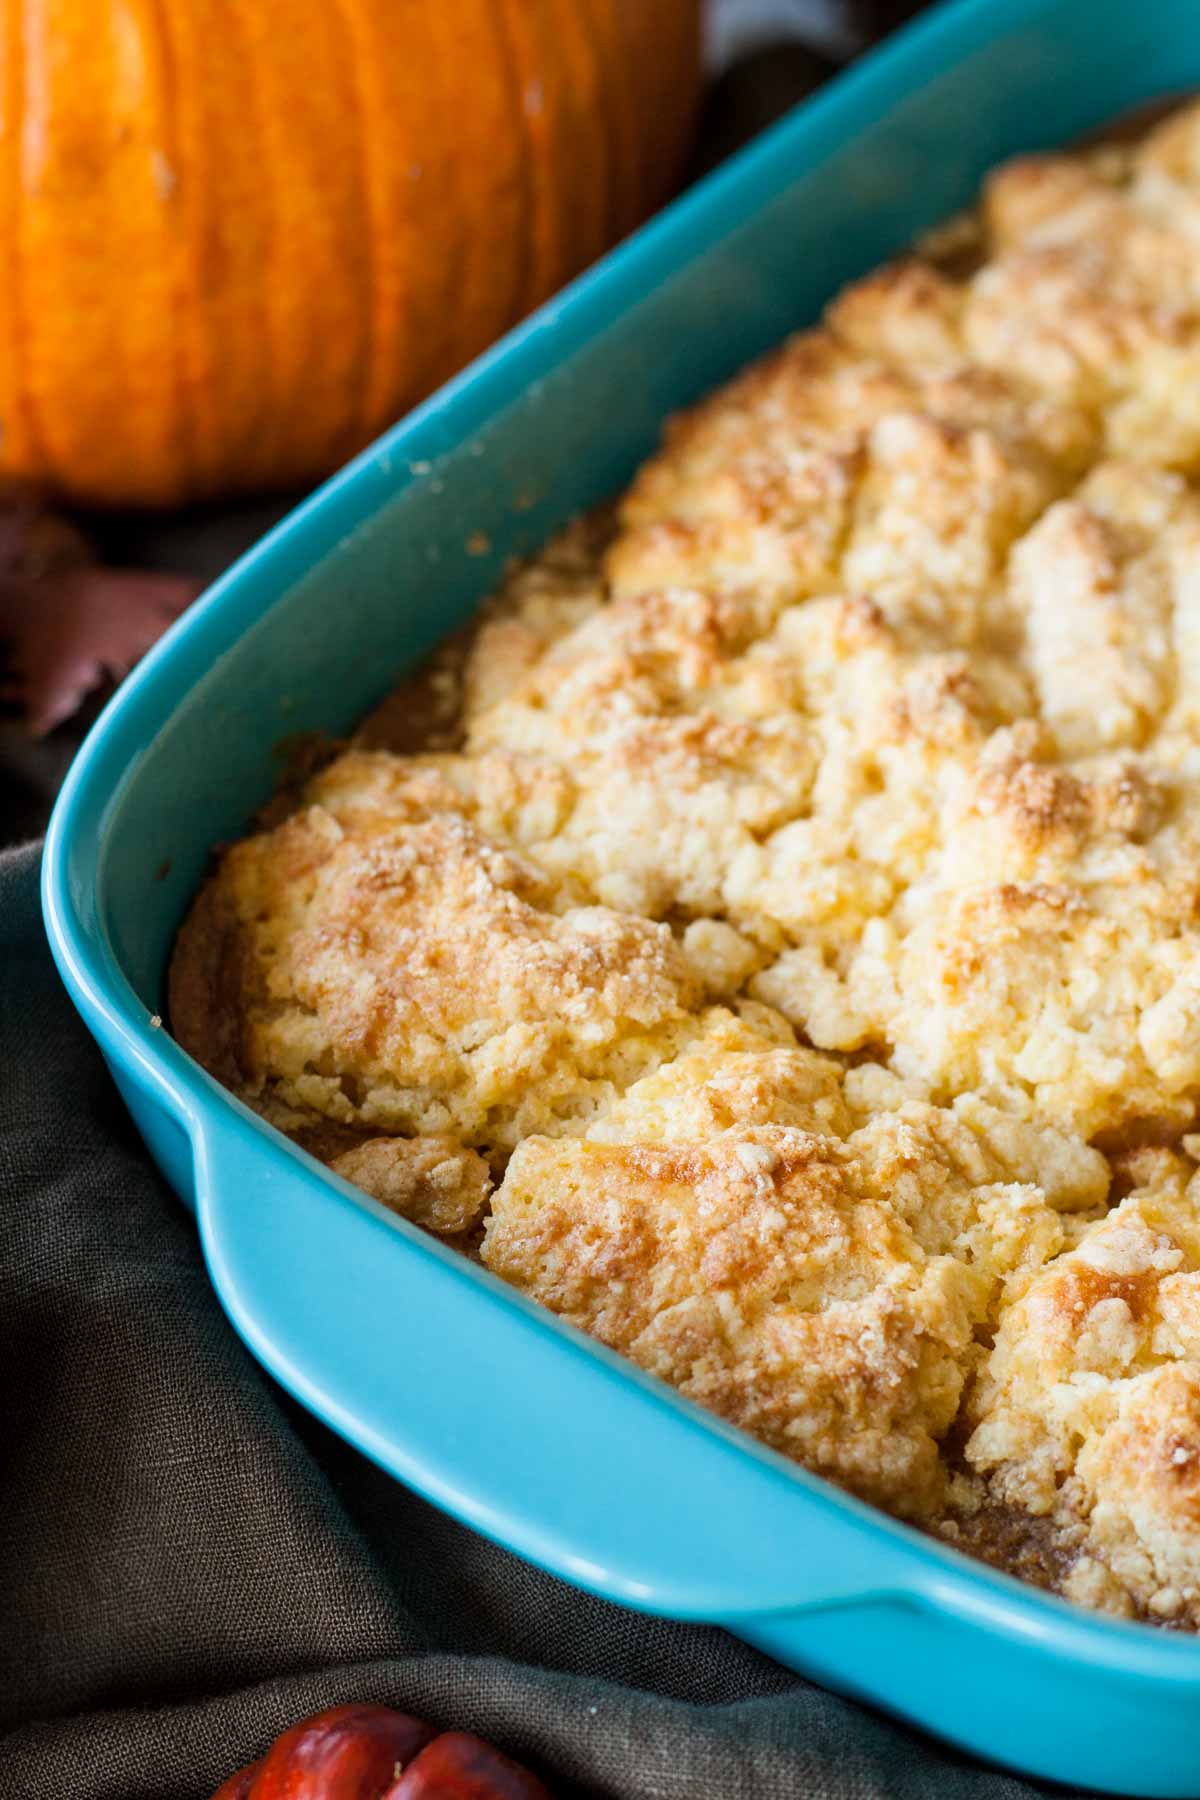 Close up of the pumpkin cobbler in the teal casserole dish.